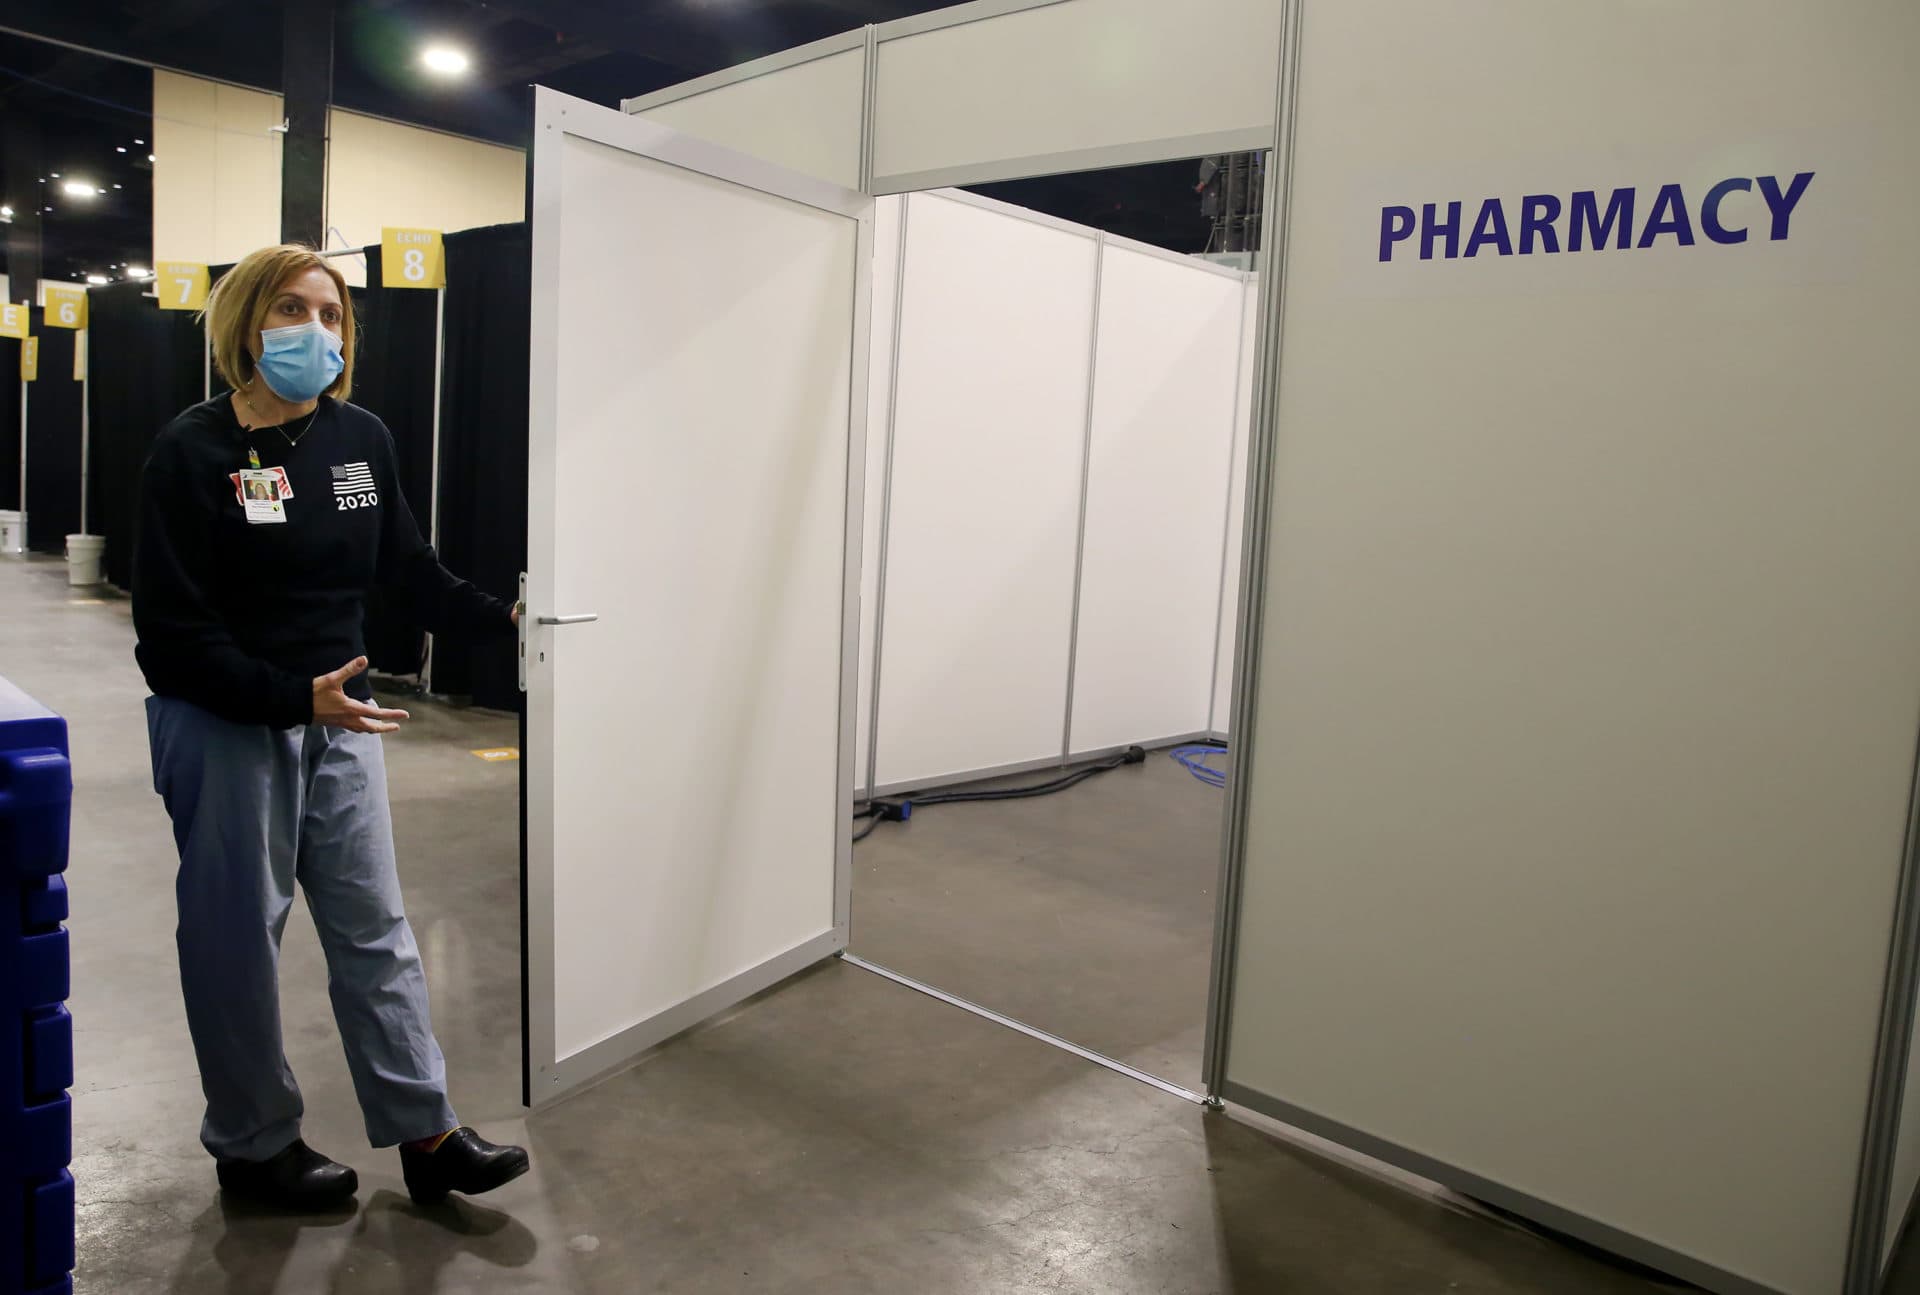 Janelle Forget, Associate Vice President of risk management, UMass Memorial, shows off a pharmacy at the DCU Center as it gears up to be used as a Covid field hospital for the second time. (Nancy Lane/MediaNews Group/Boston Herald)